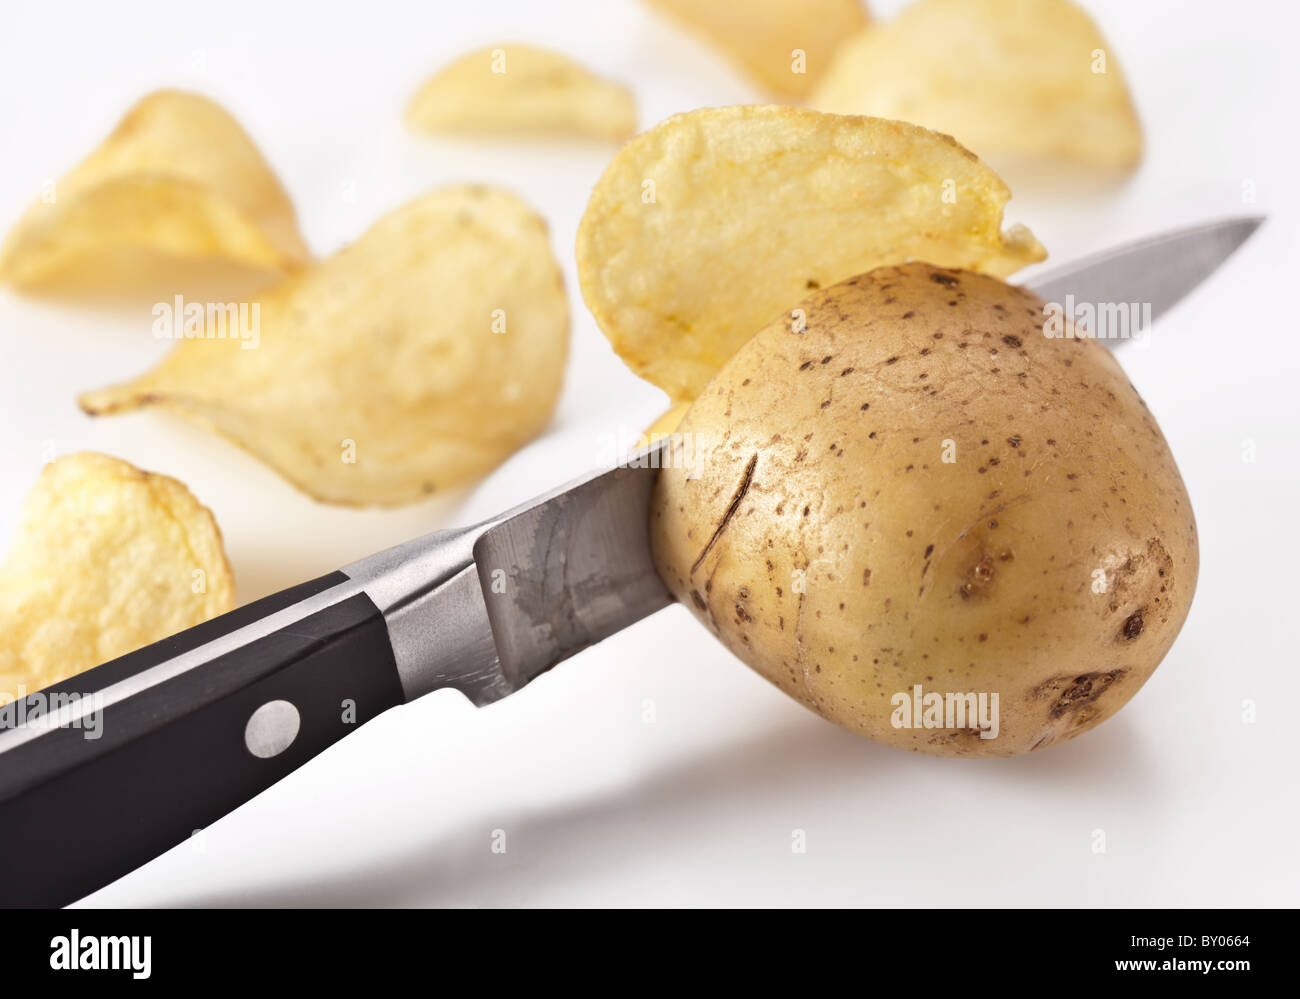 Conceptual image - the knife cuts fresh potatoes and potato chips are obtained. Stock Photo